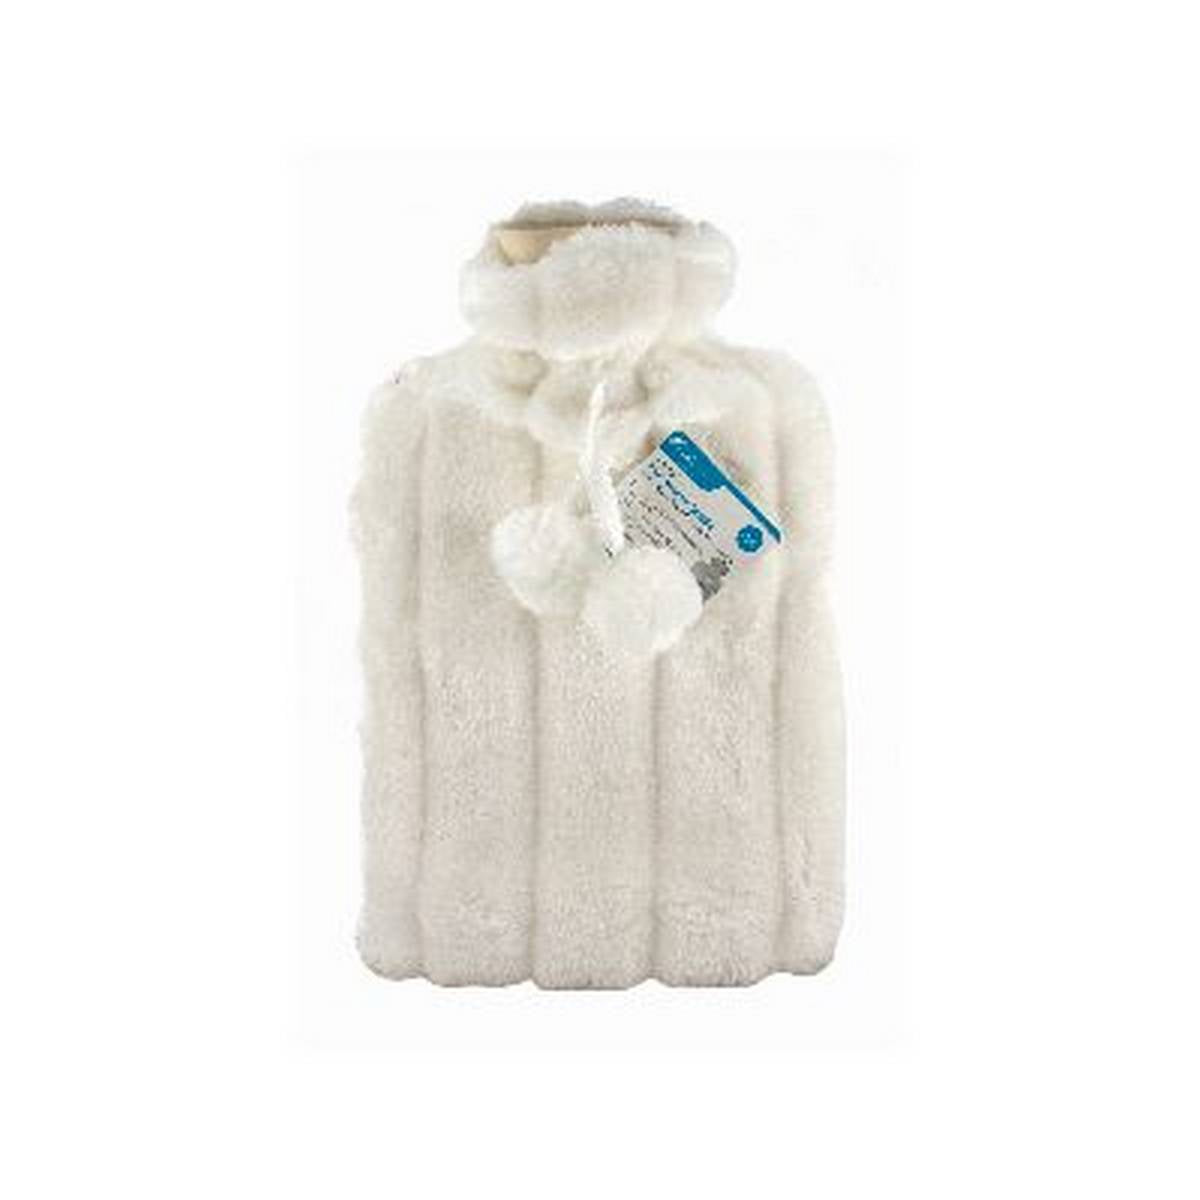 ASHLEY 2L HOT WATER BOTTLE WITH PLUSH FAUX FUR COVER - CREAM BB-HW182